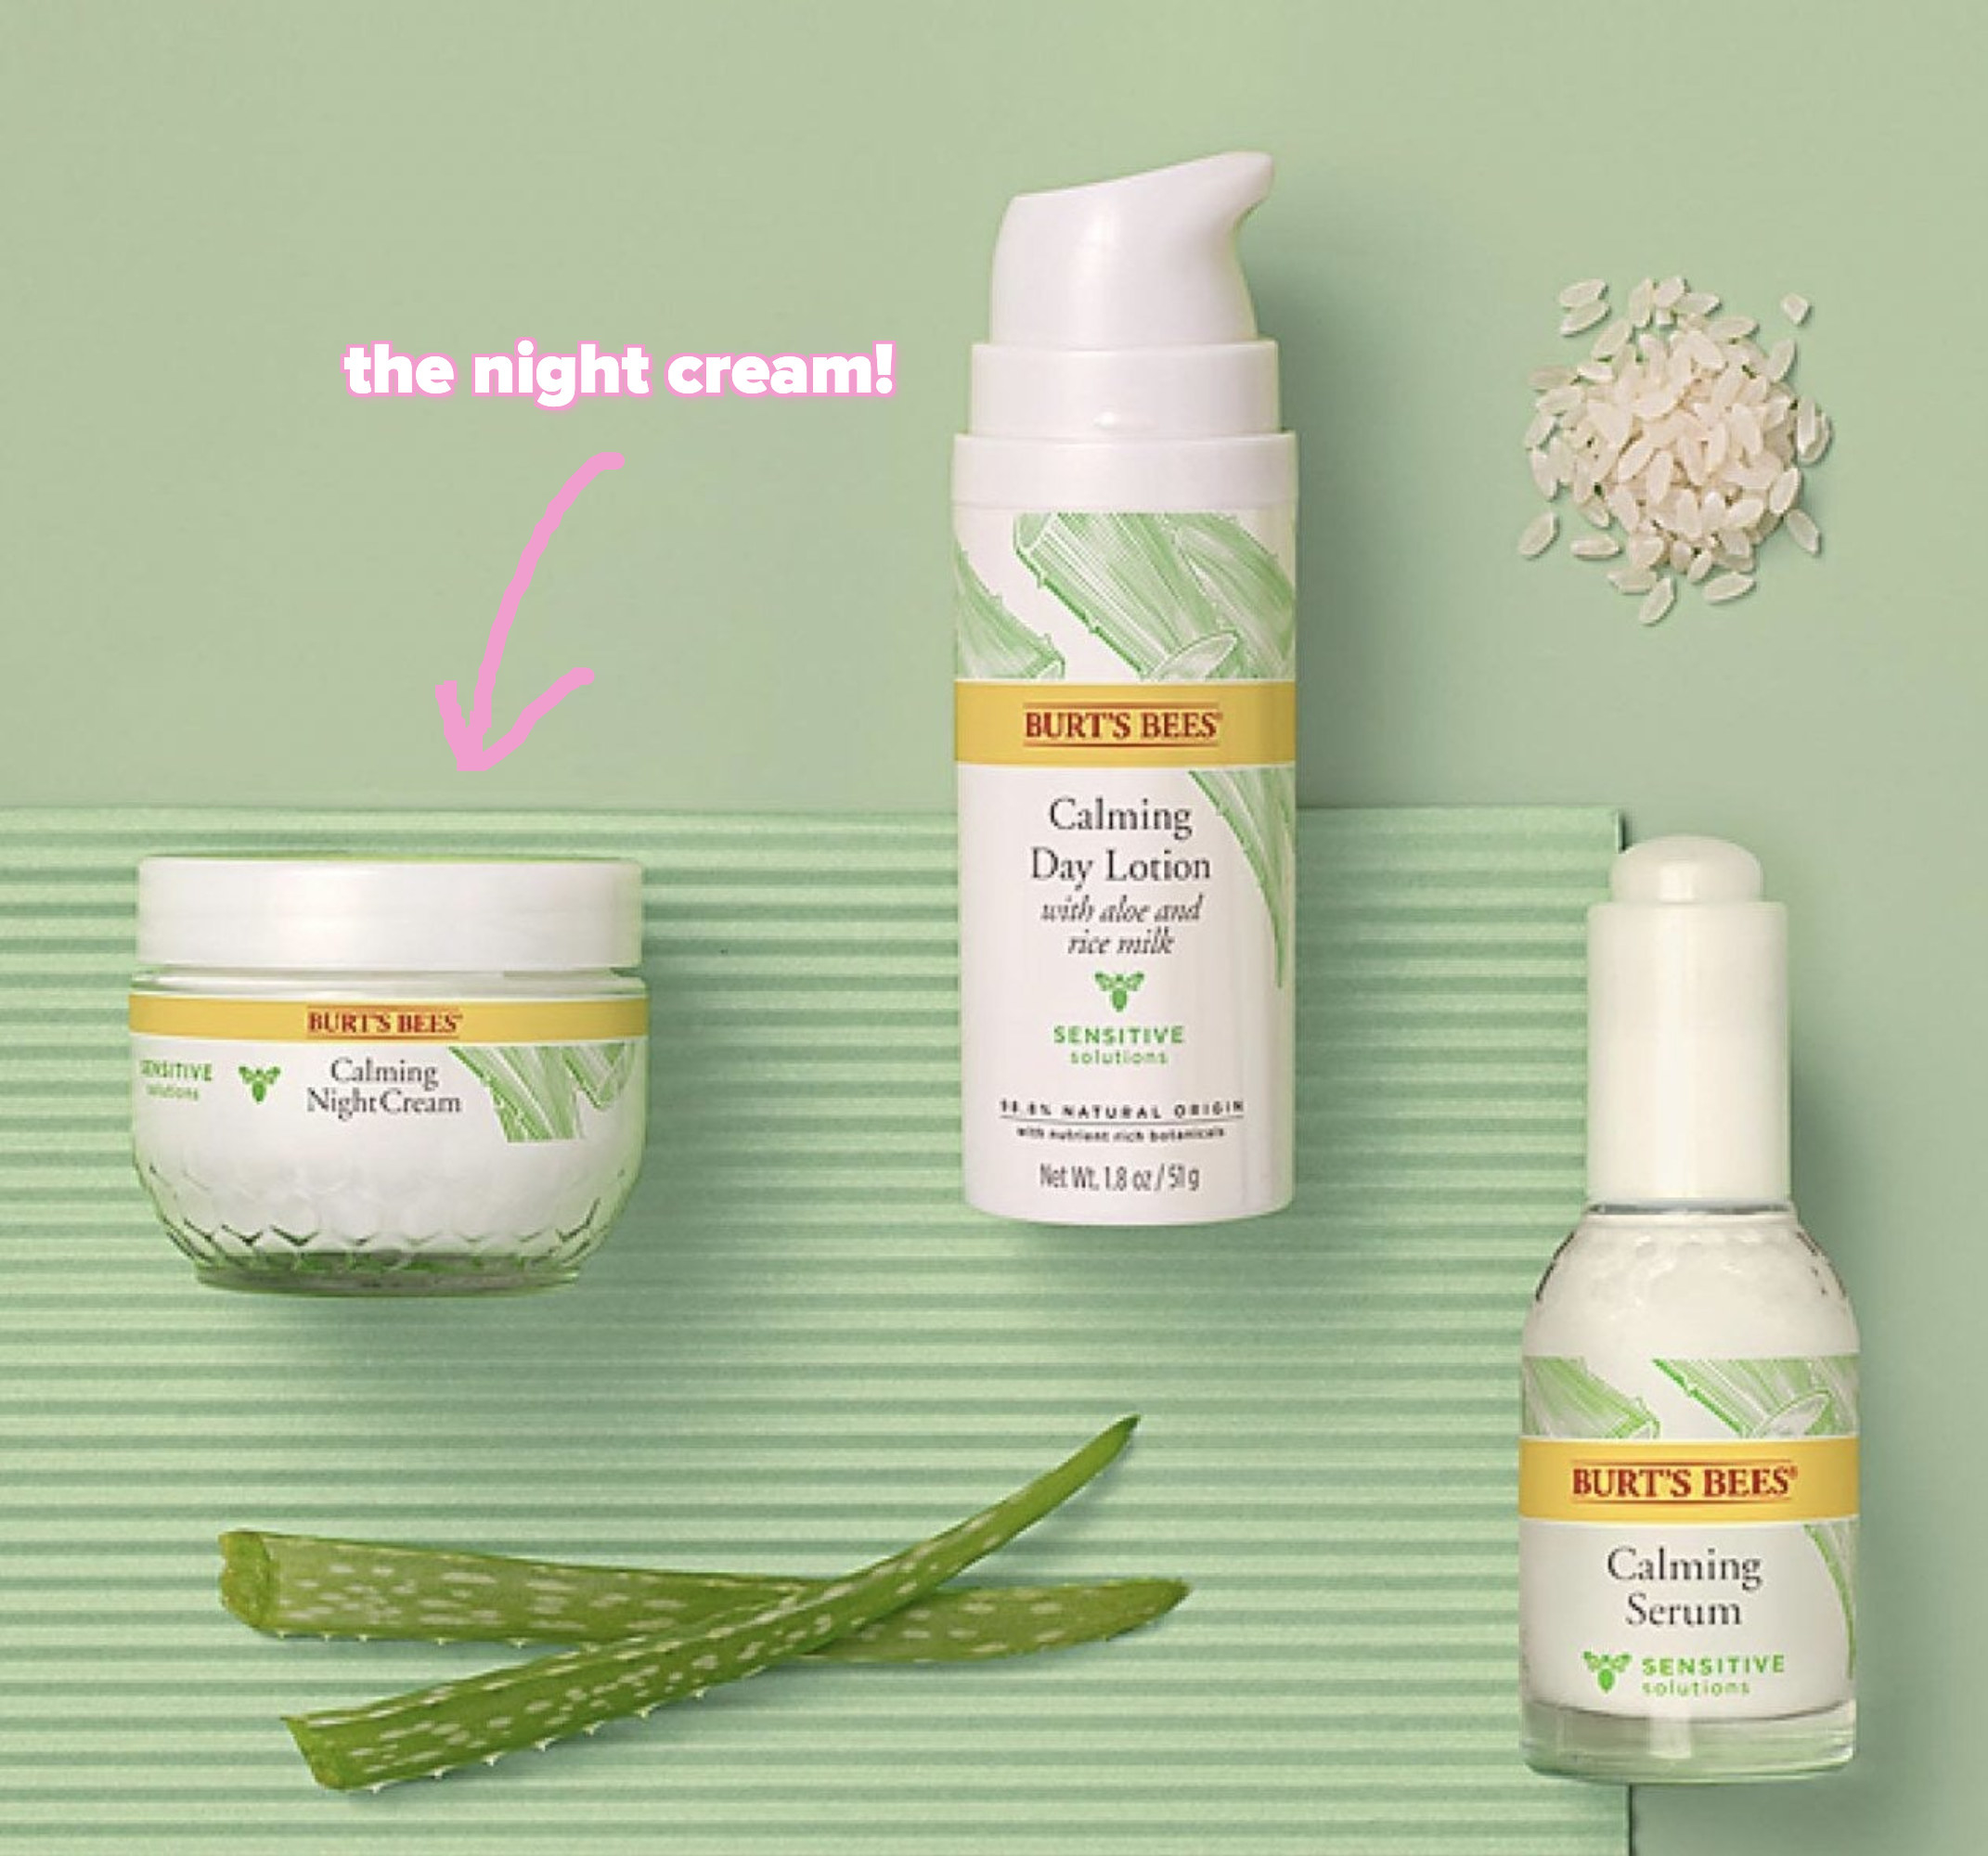 A jar of night cream, a bottle of day lotion, and a calming serum